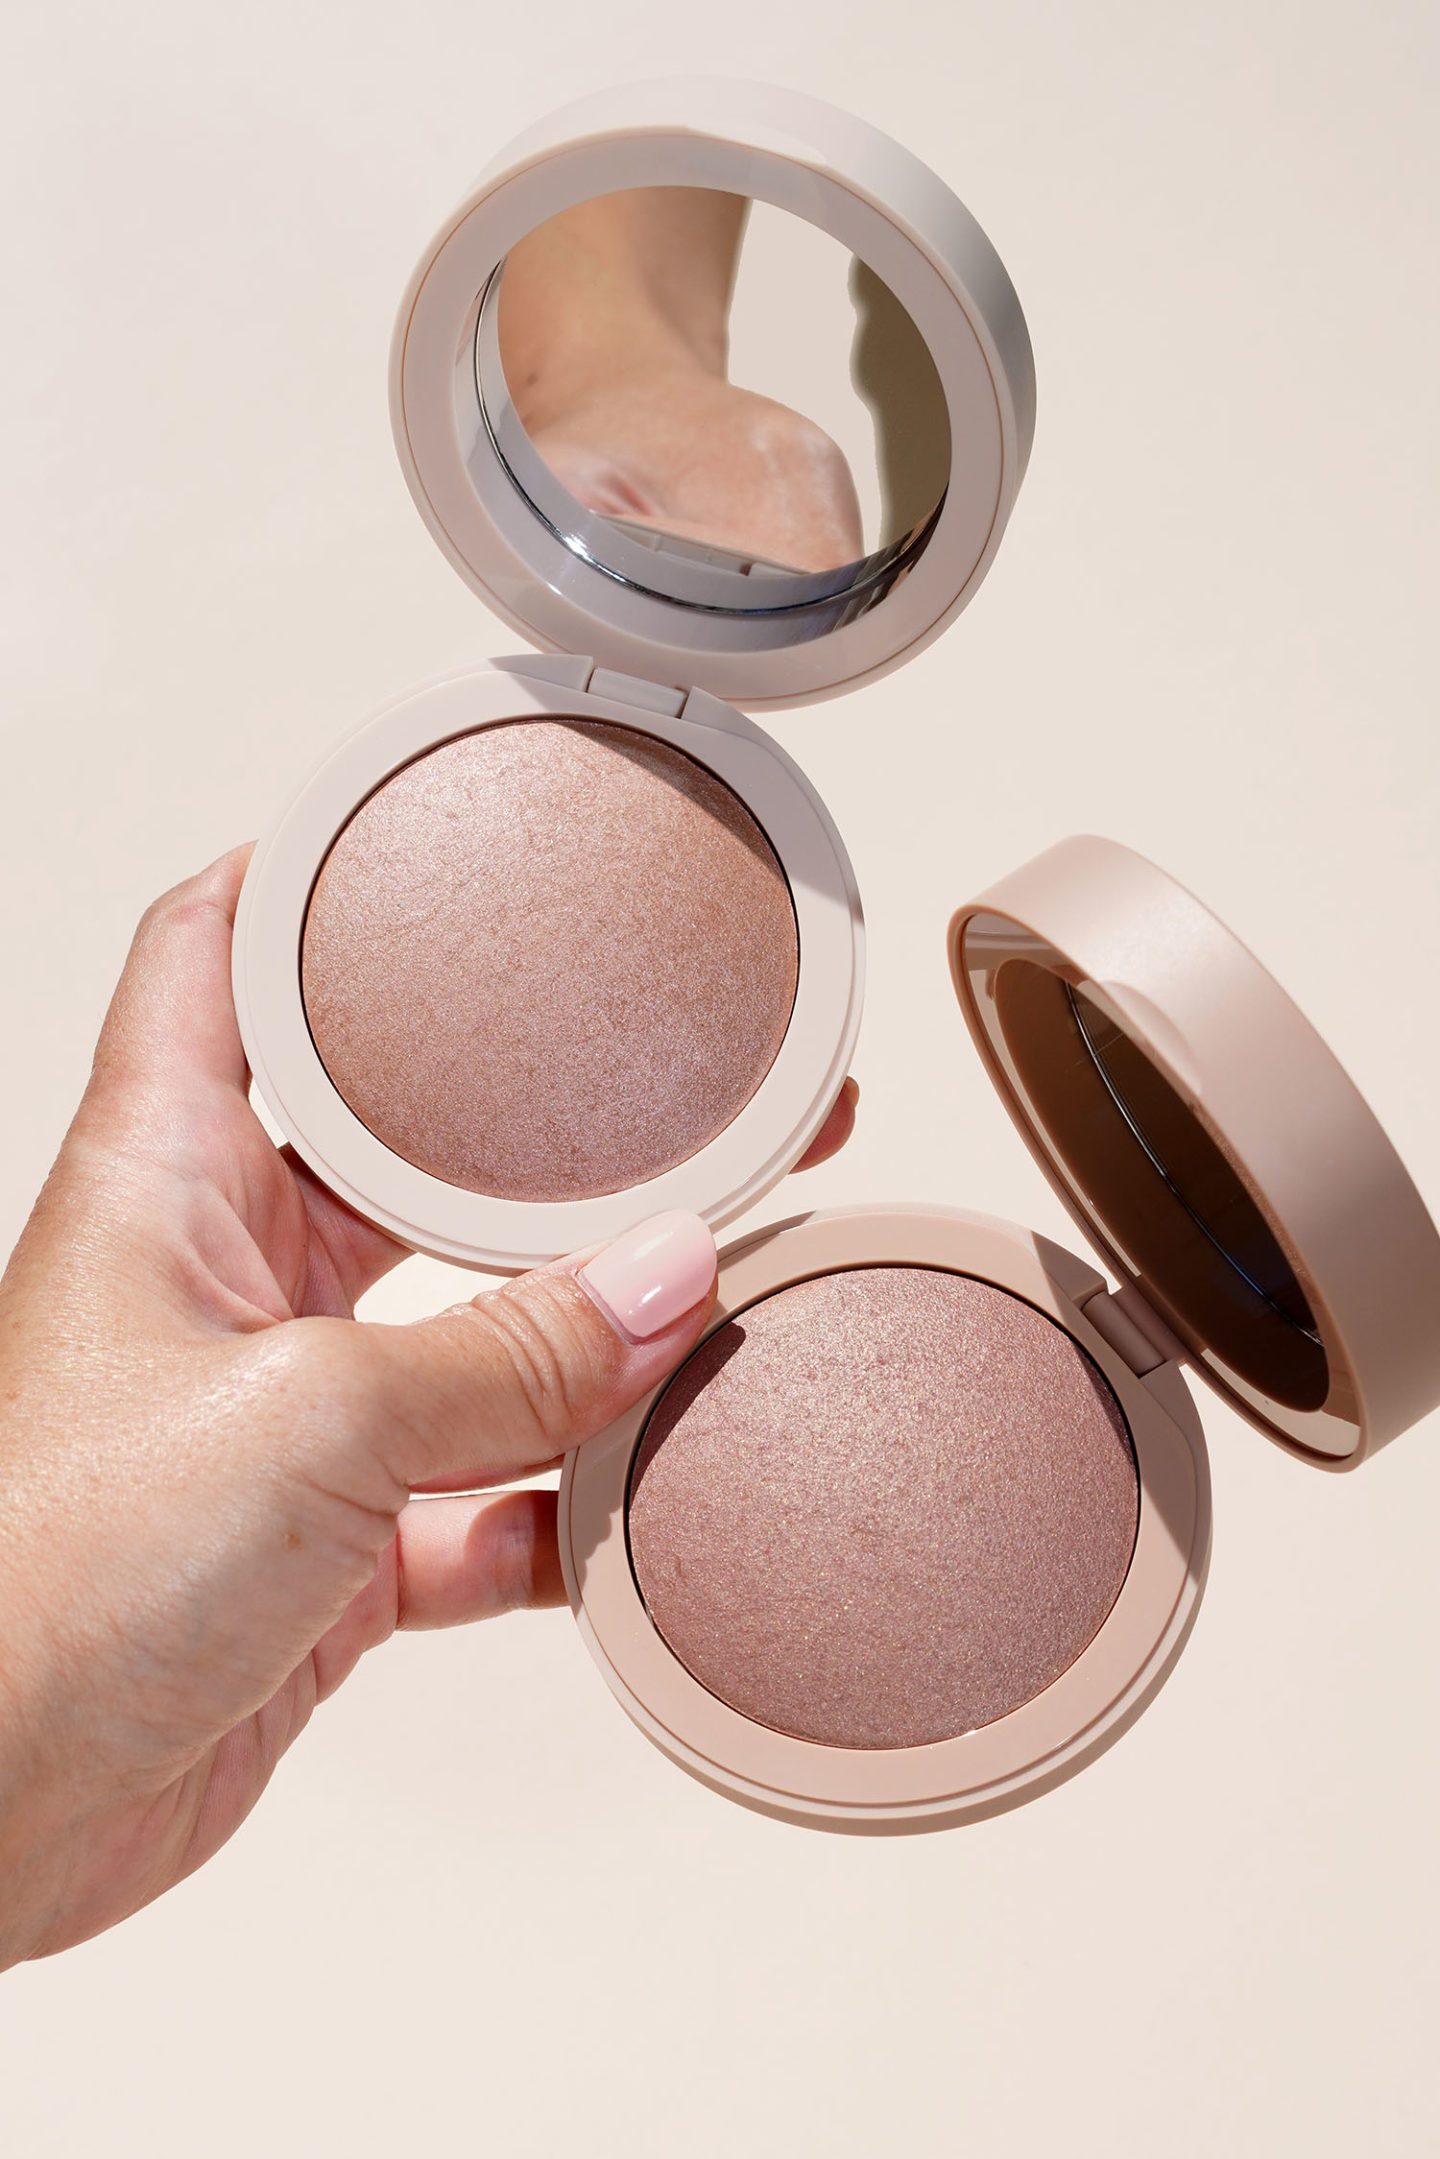 EM Cosmetics Heaven's Glow Blushes in Baroque and Rococo